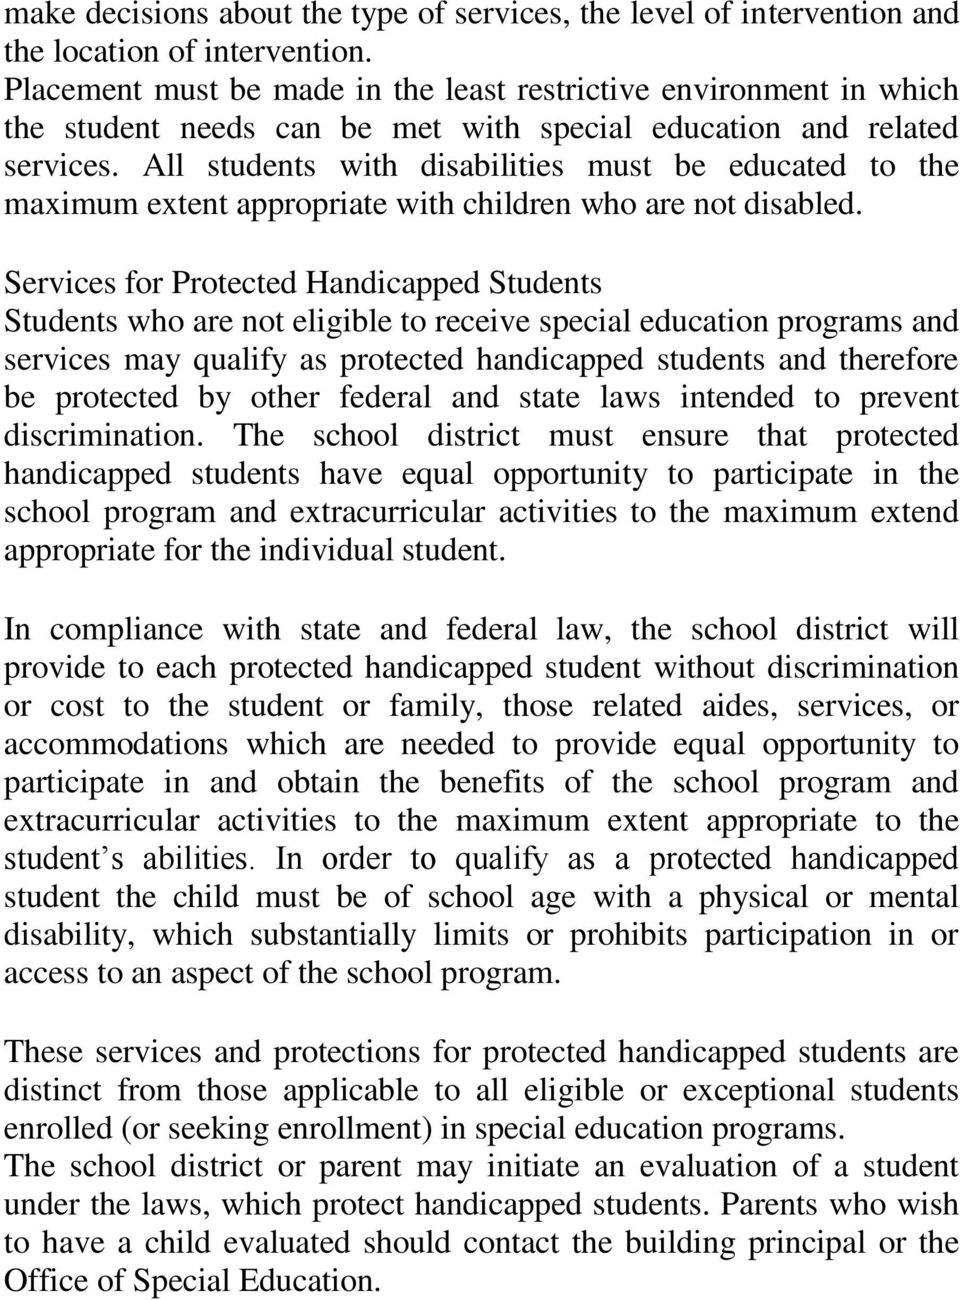 All students with disabilities must be educated to the maximum extent appropriate with children who are not disabled.